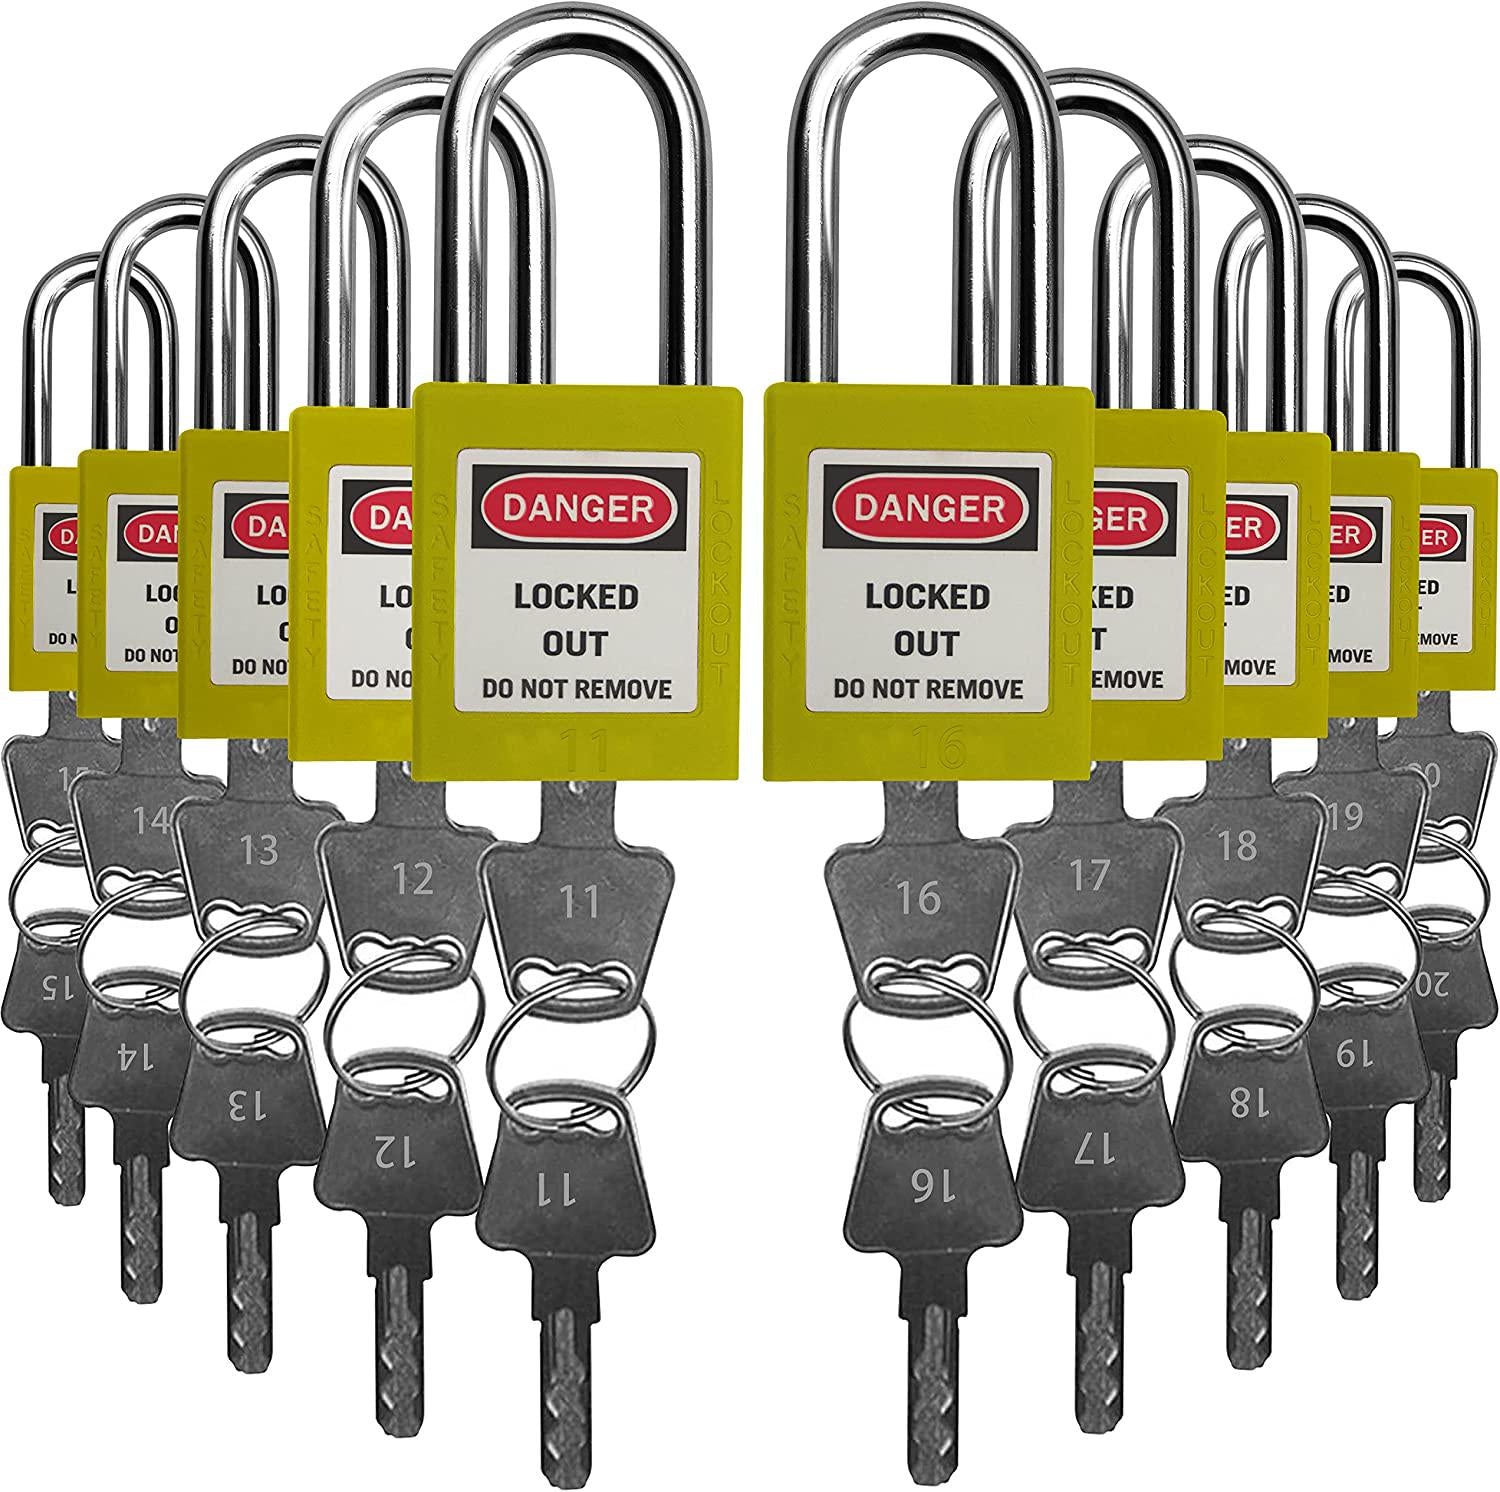 SAFBY, Lockout Tagout Locks, Safety Padlock, Keyed Differently Loto Safety Padlocks for Lock Out Tag Out ,Key Different 10 PCS with Number (Yellow NO.11-20)